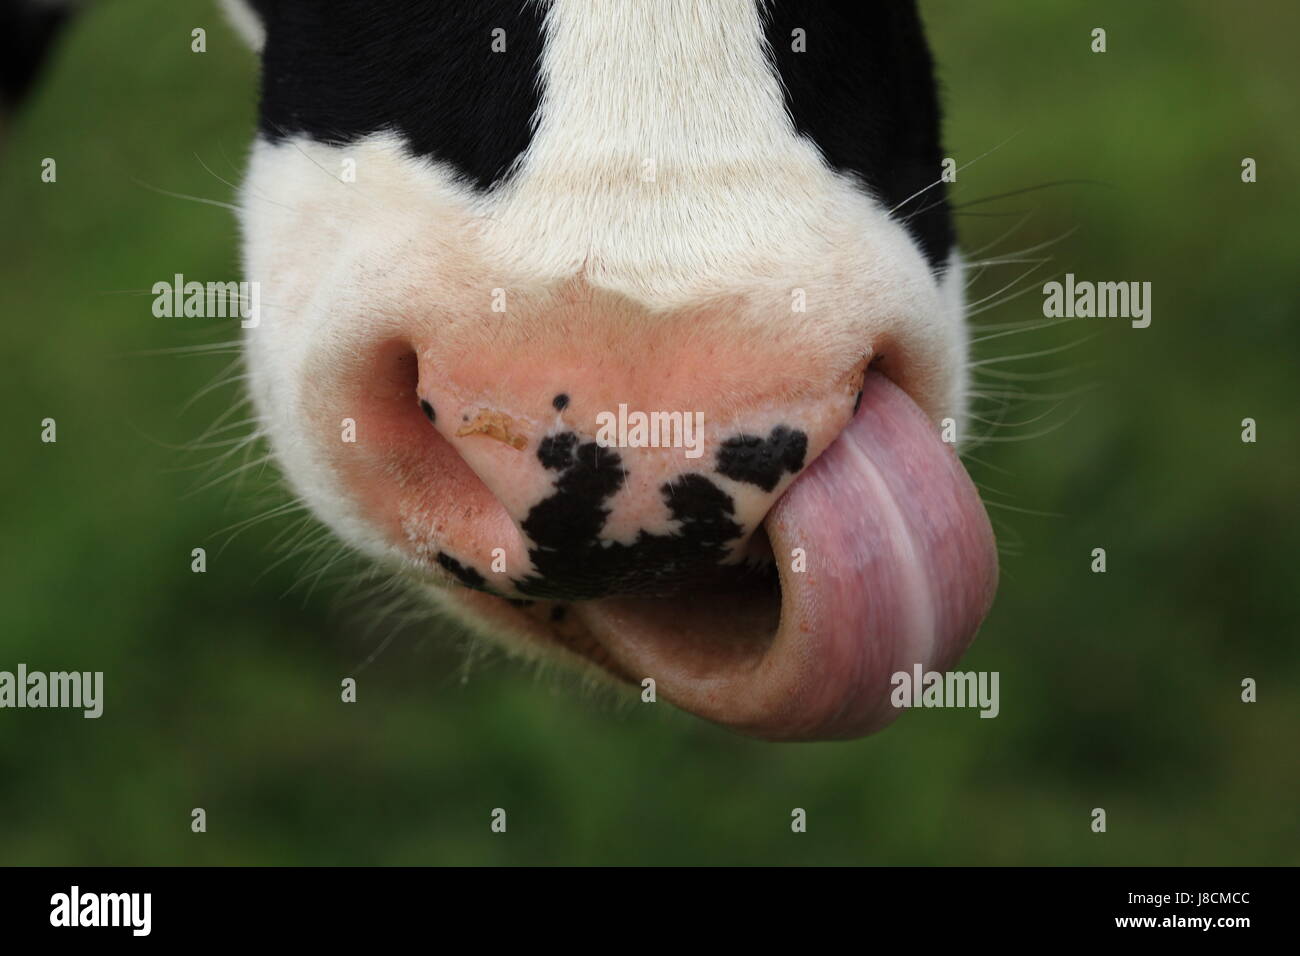 mouth, tongue, nostril, nose, cow, muzzle, lick, indicate, show, macro, Stock Photo